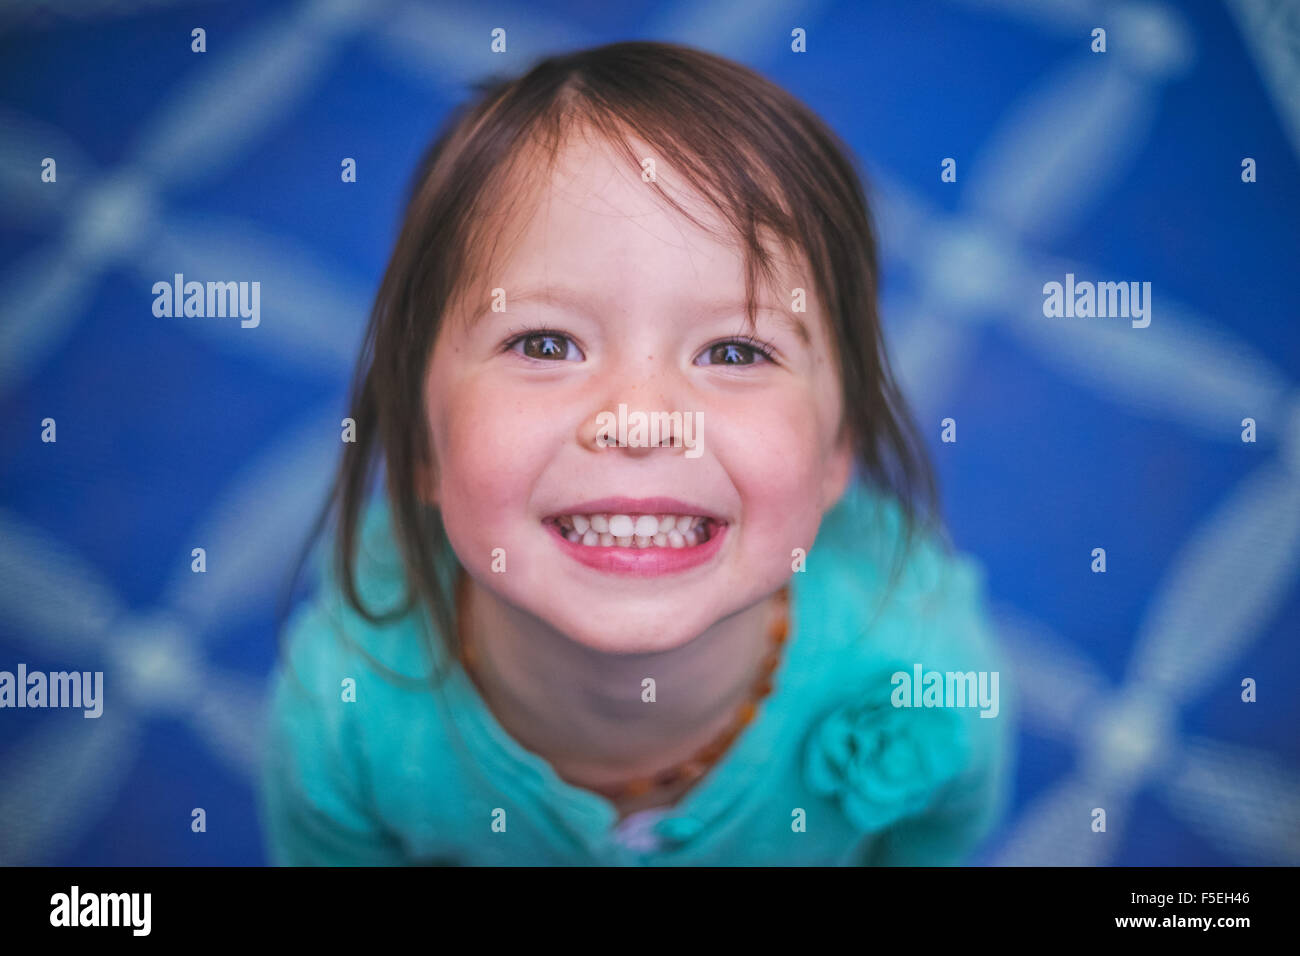 Portrait of a smiling girl looking up Stock Photo